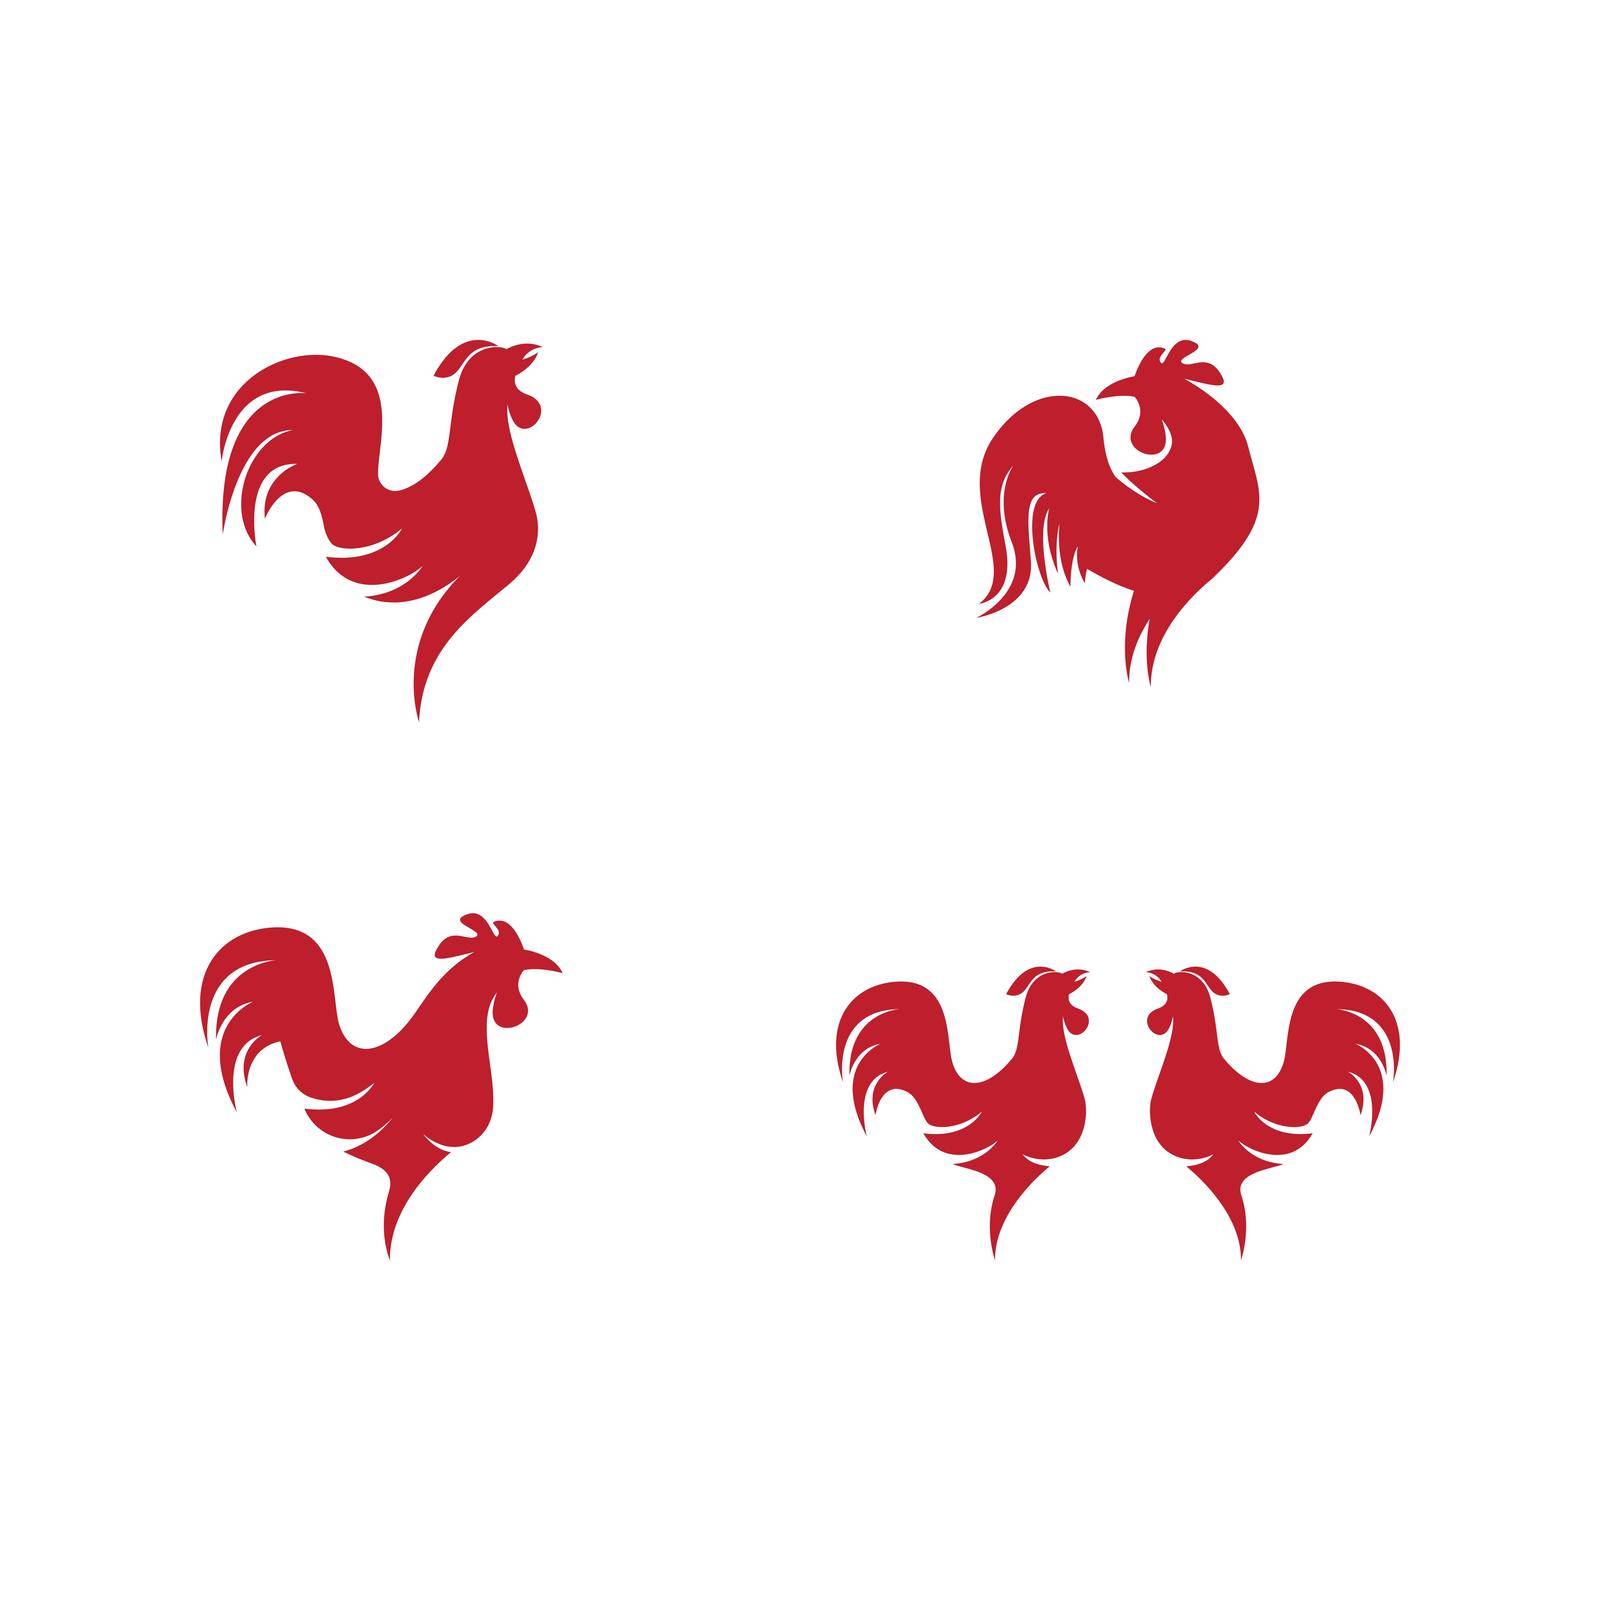 Rooster illustration by awk